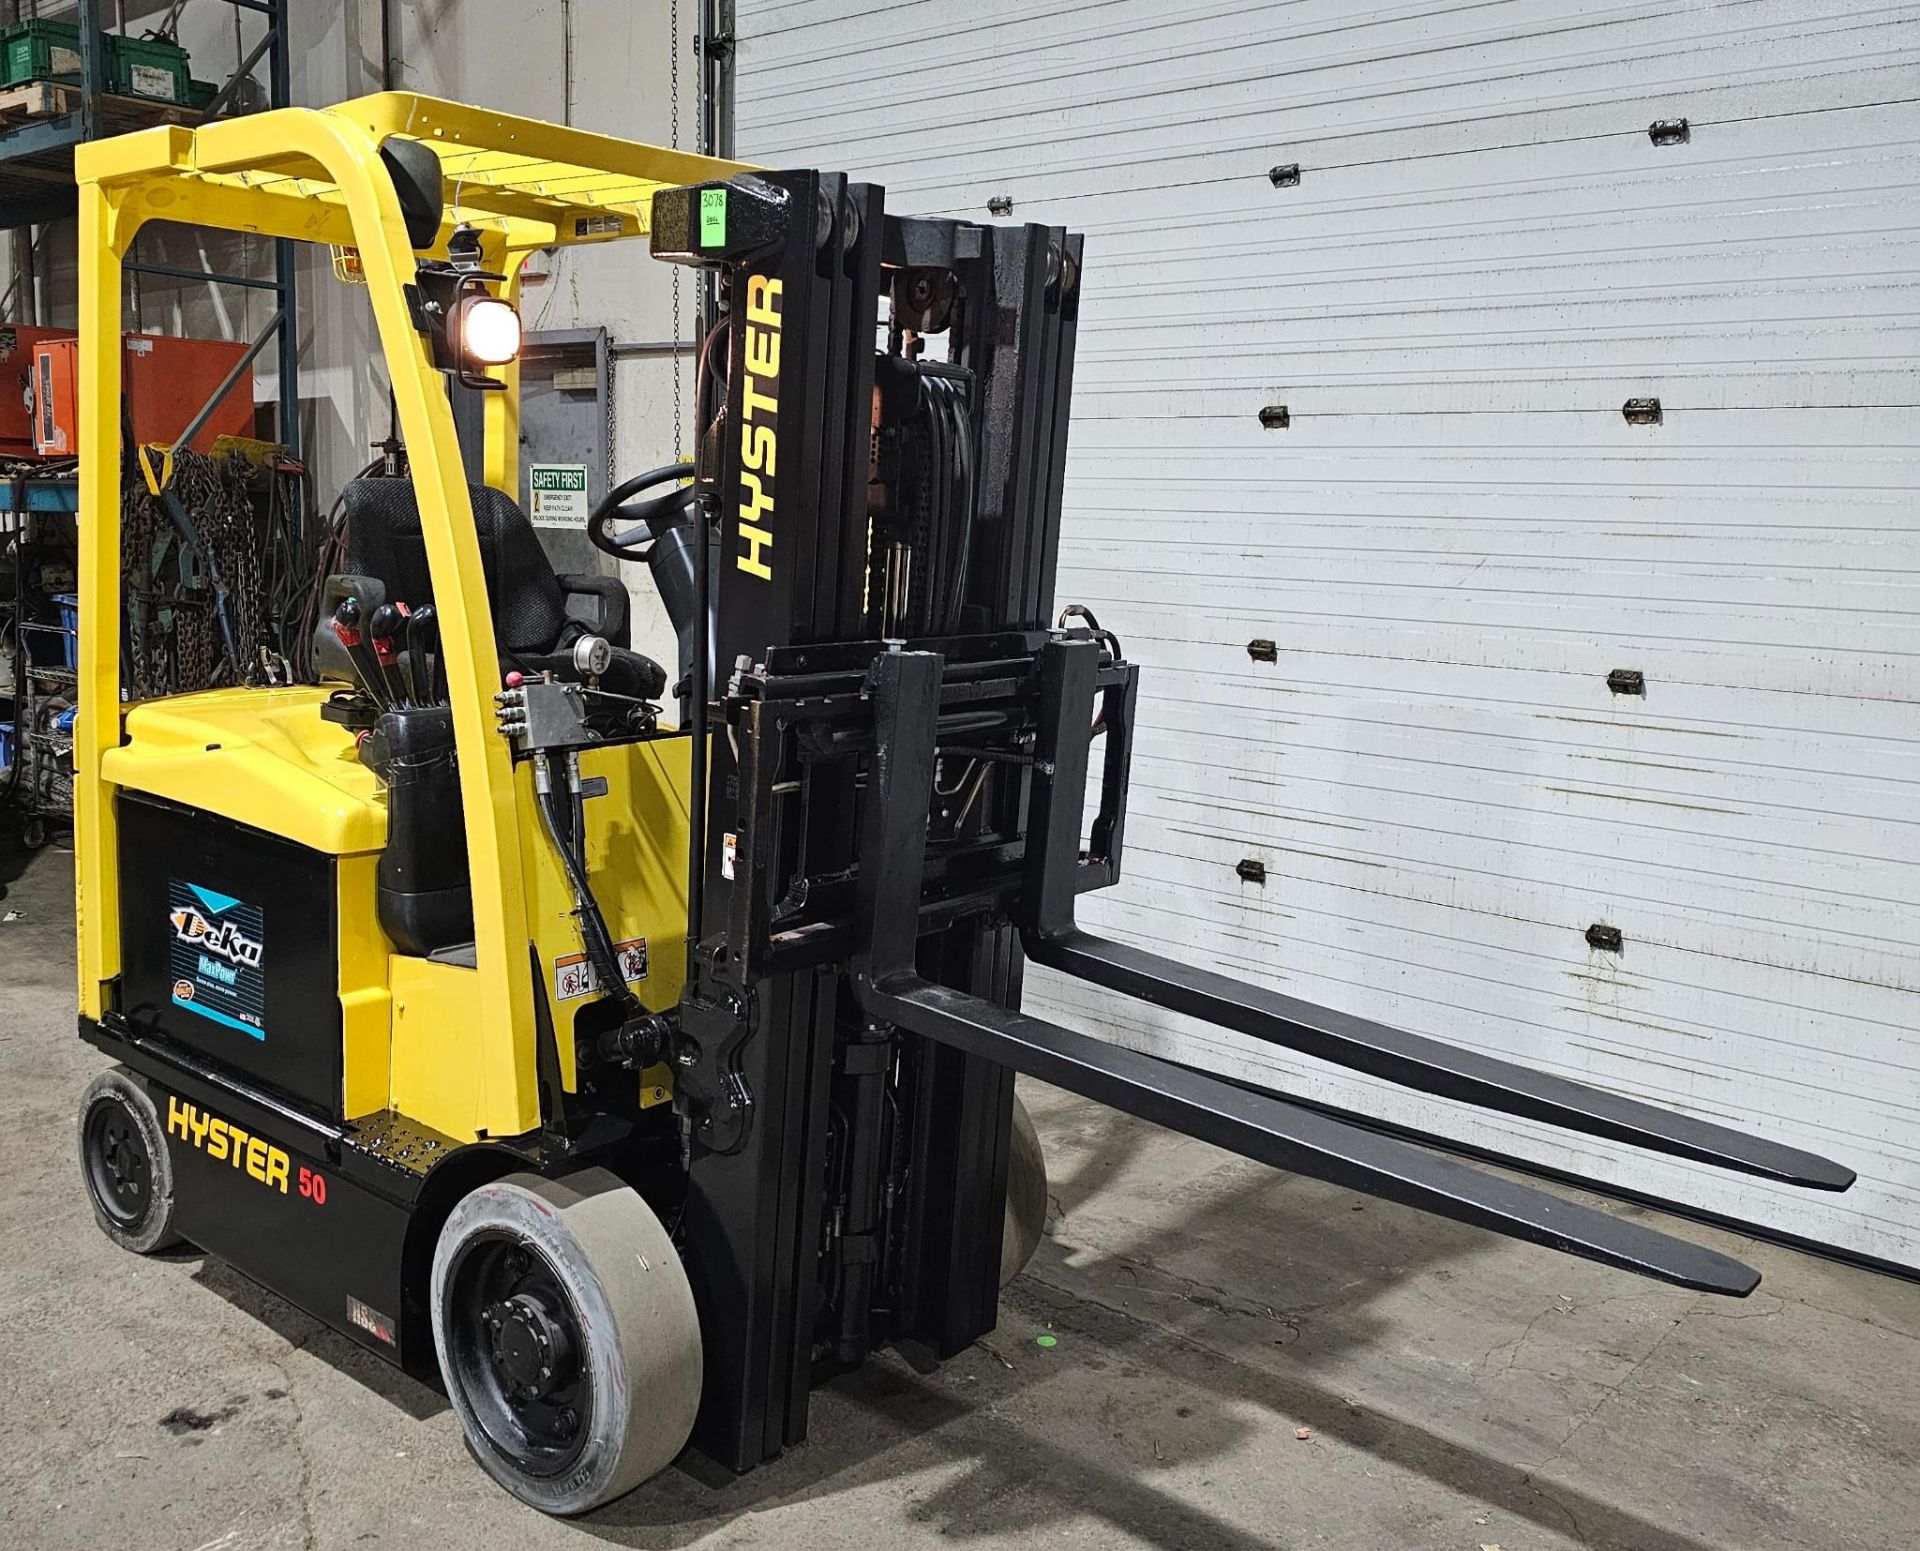 2014 Hyster 5,000lbs Capacity Electric Forklift 48V with sideshift 3-STAGE MAST 189" load height - Image 7 of 8